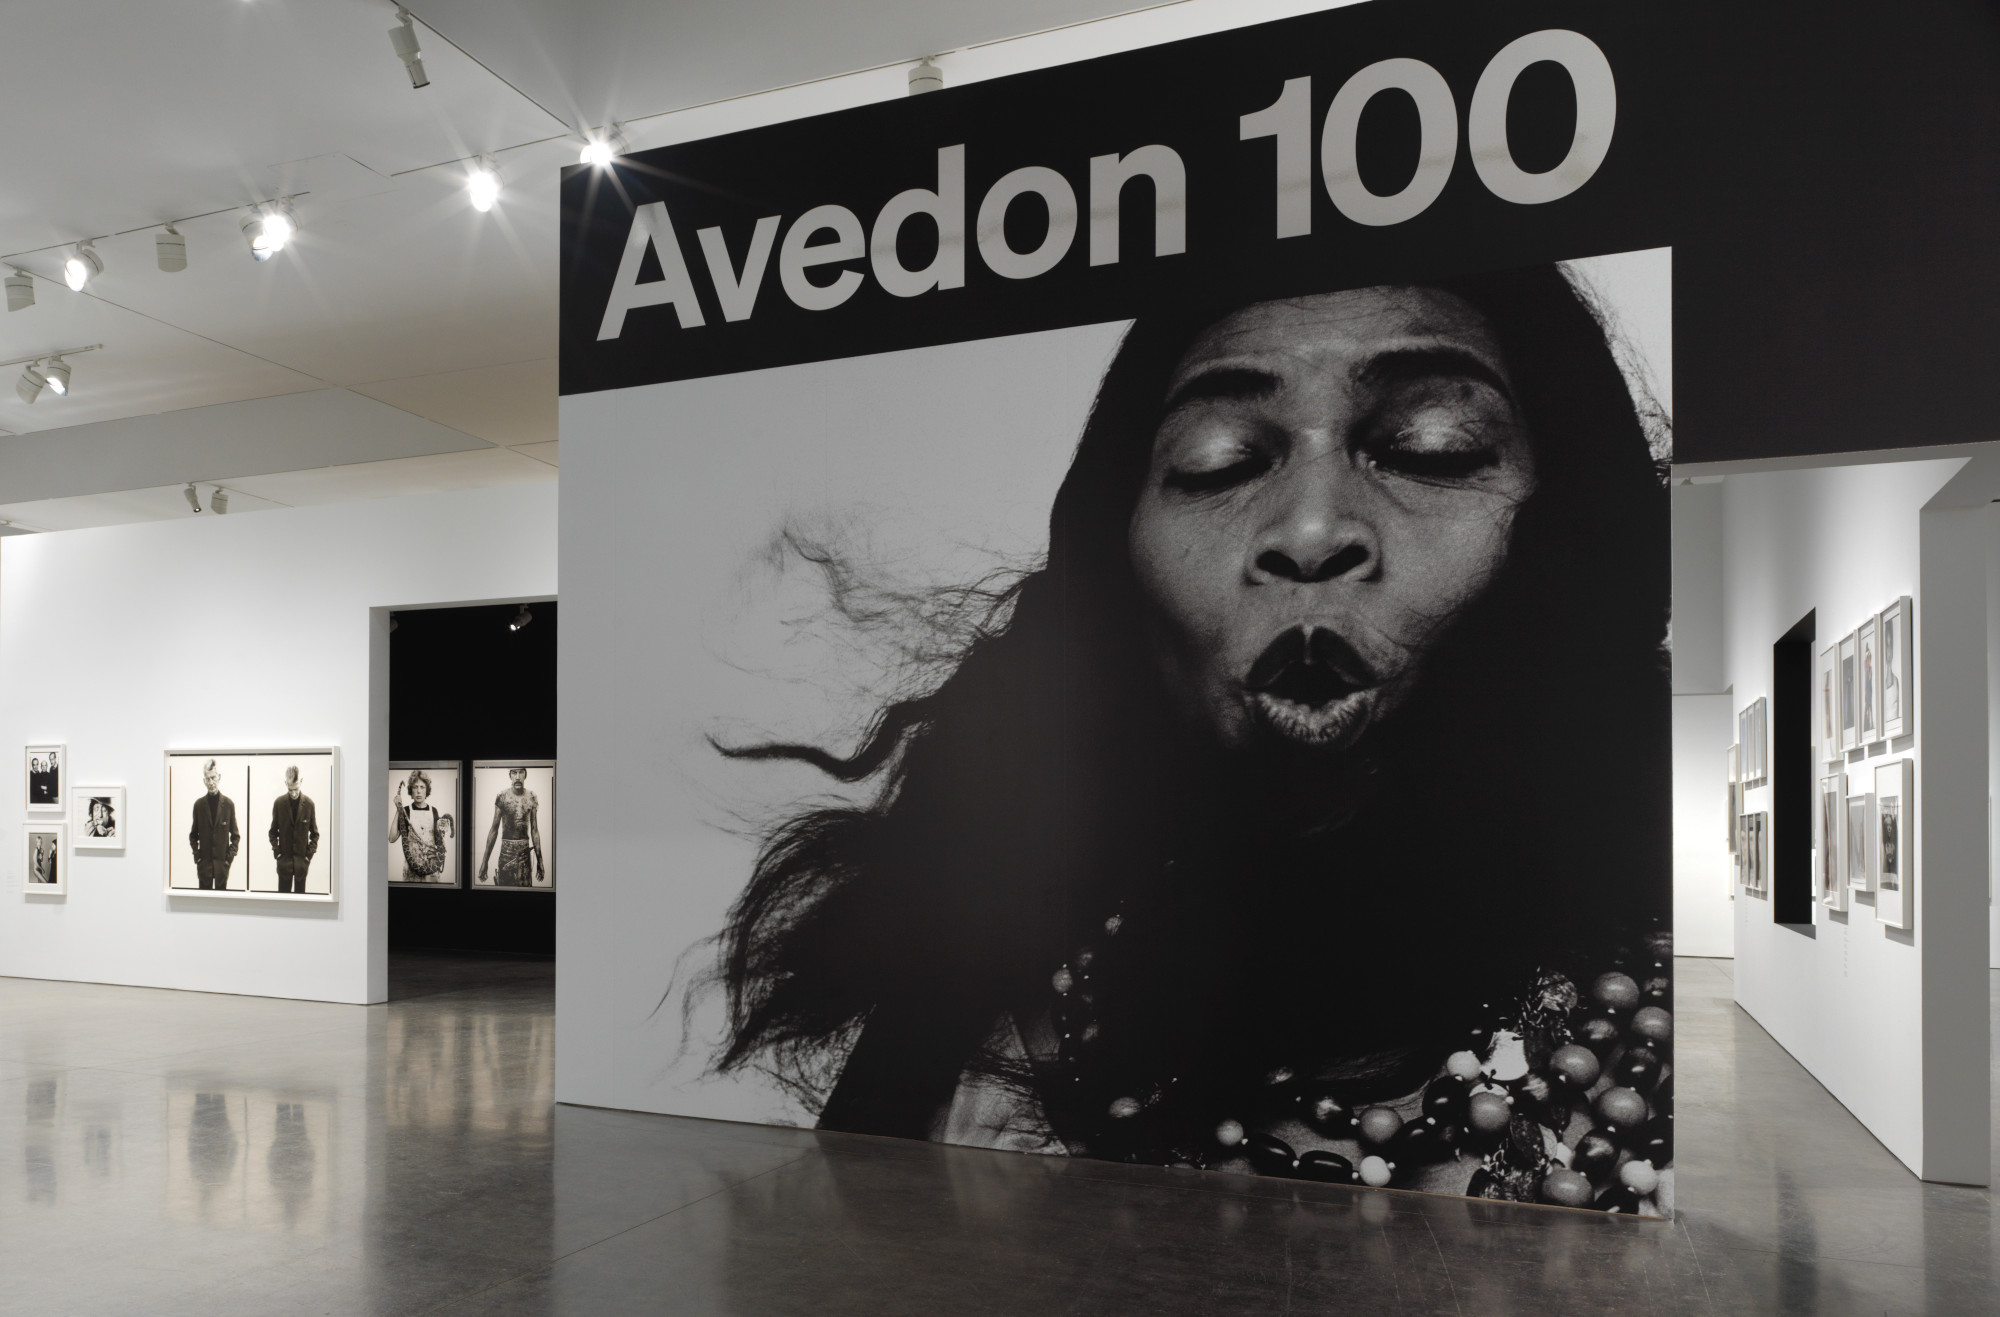 Closing Times To See Richard Avedon’s Images By means of a Present-day Lens